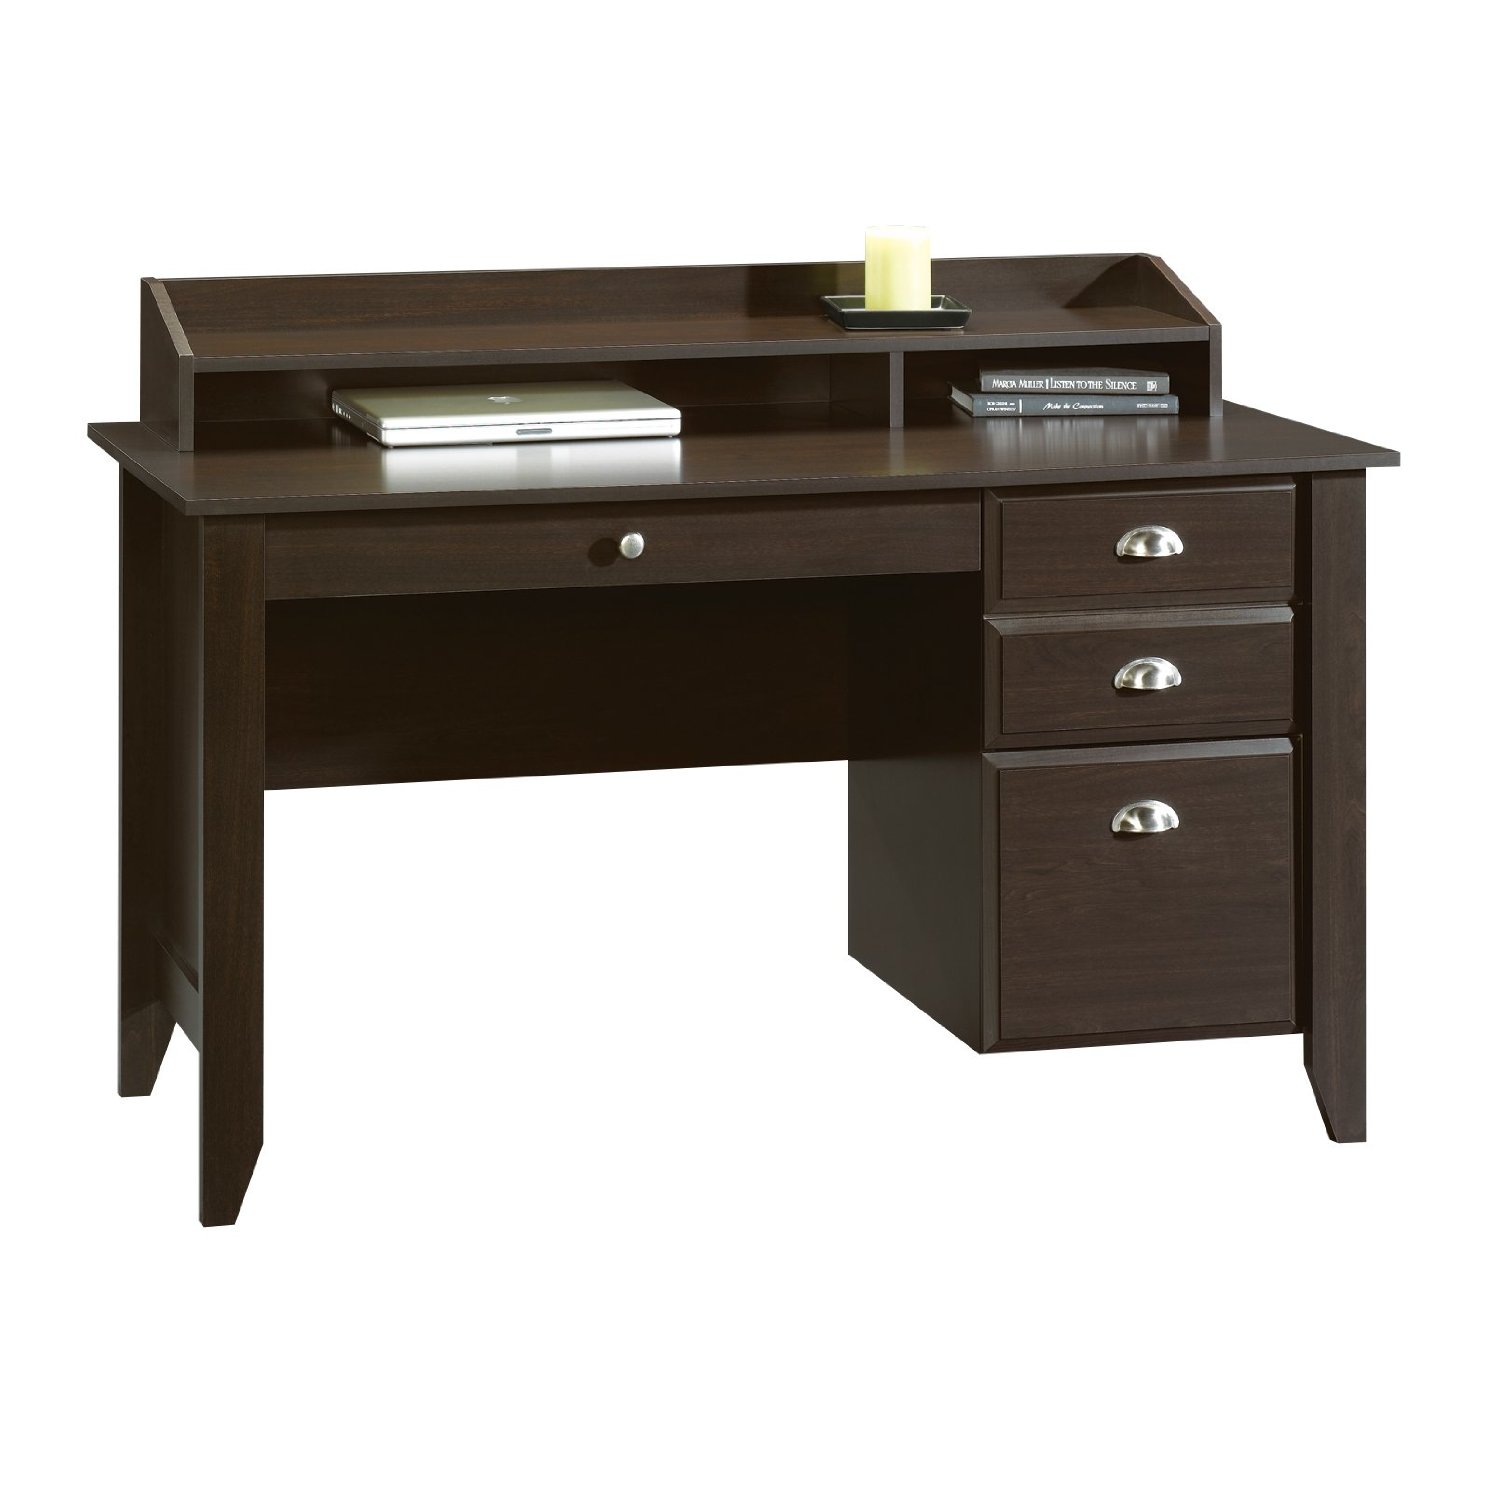 Dark Brown Wooden Desk With Triple Drawers Combined With Shelves ...